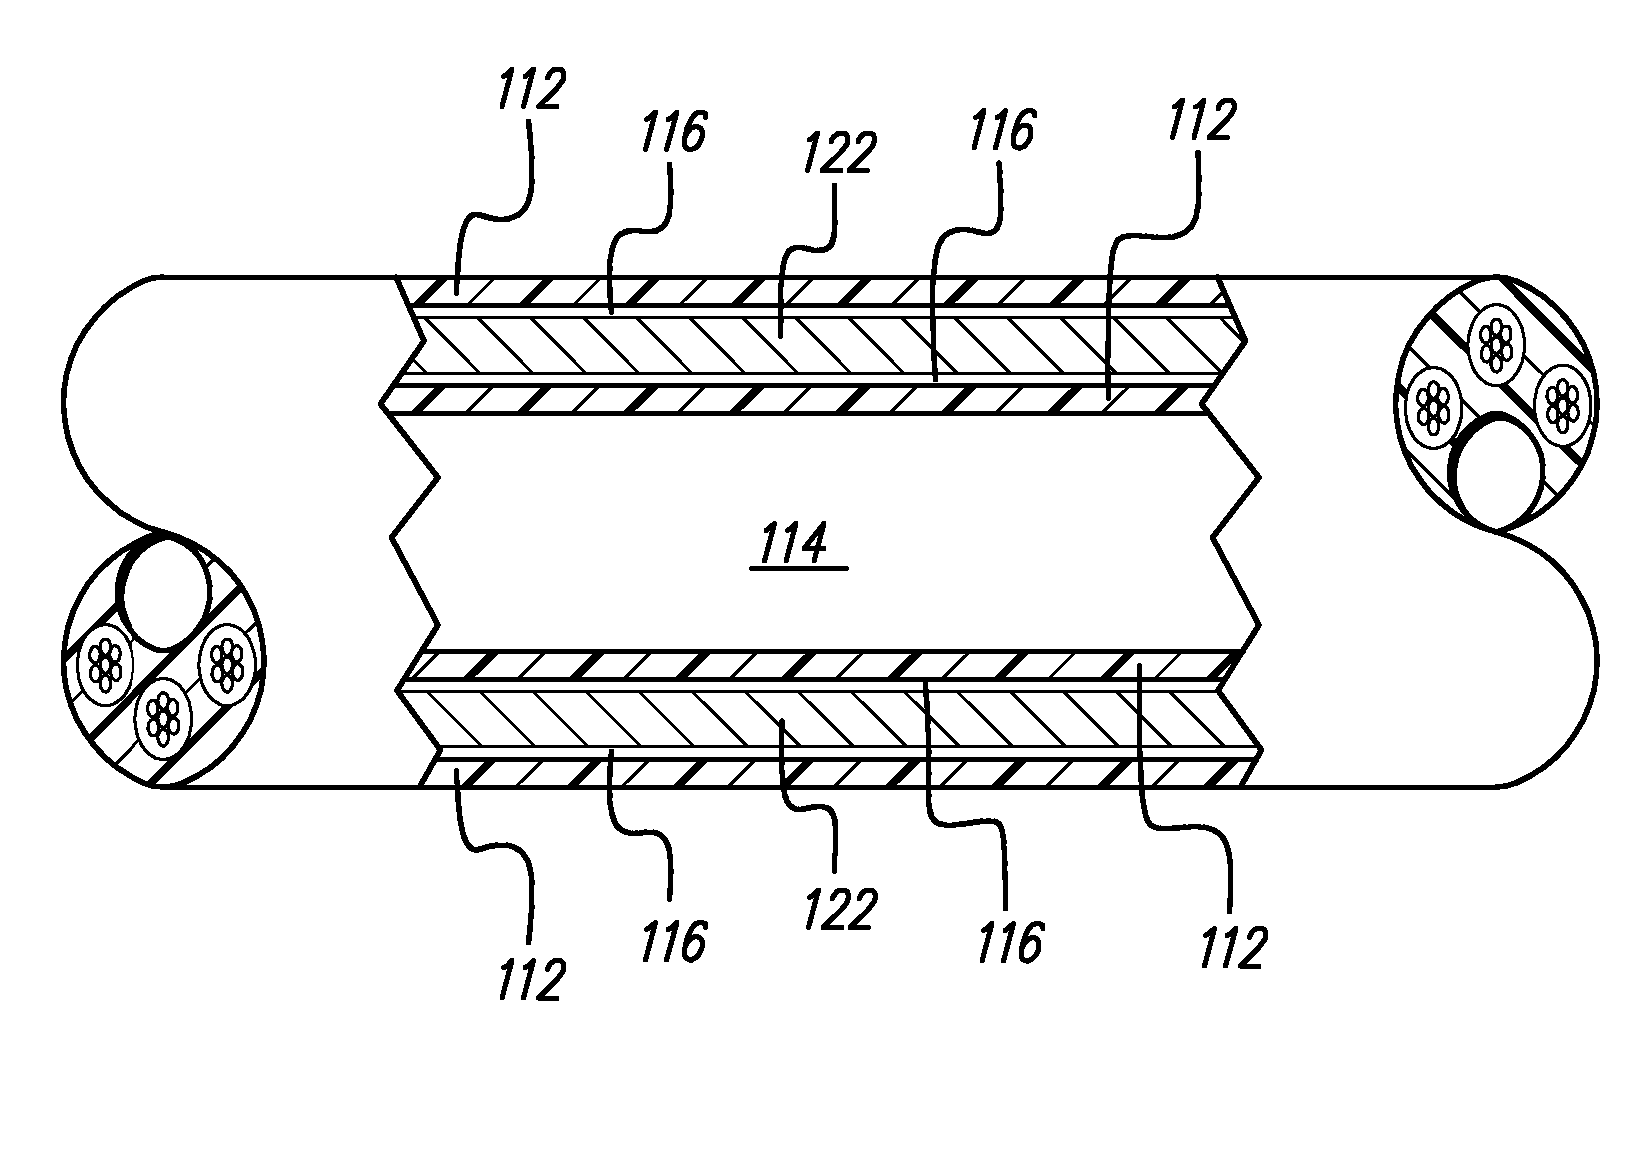 Lead assembly and method of making same